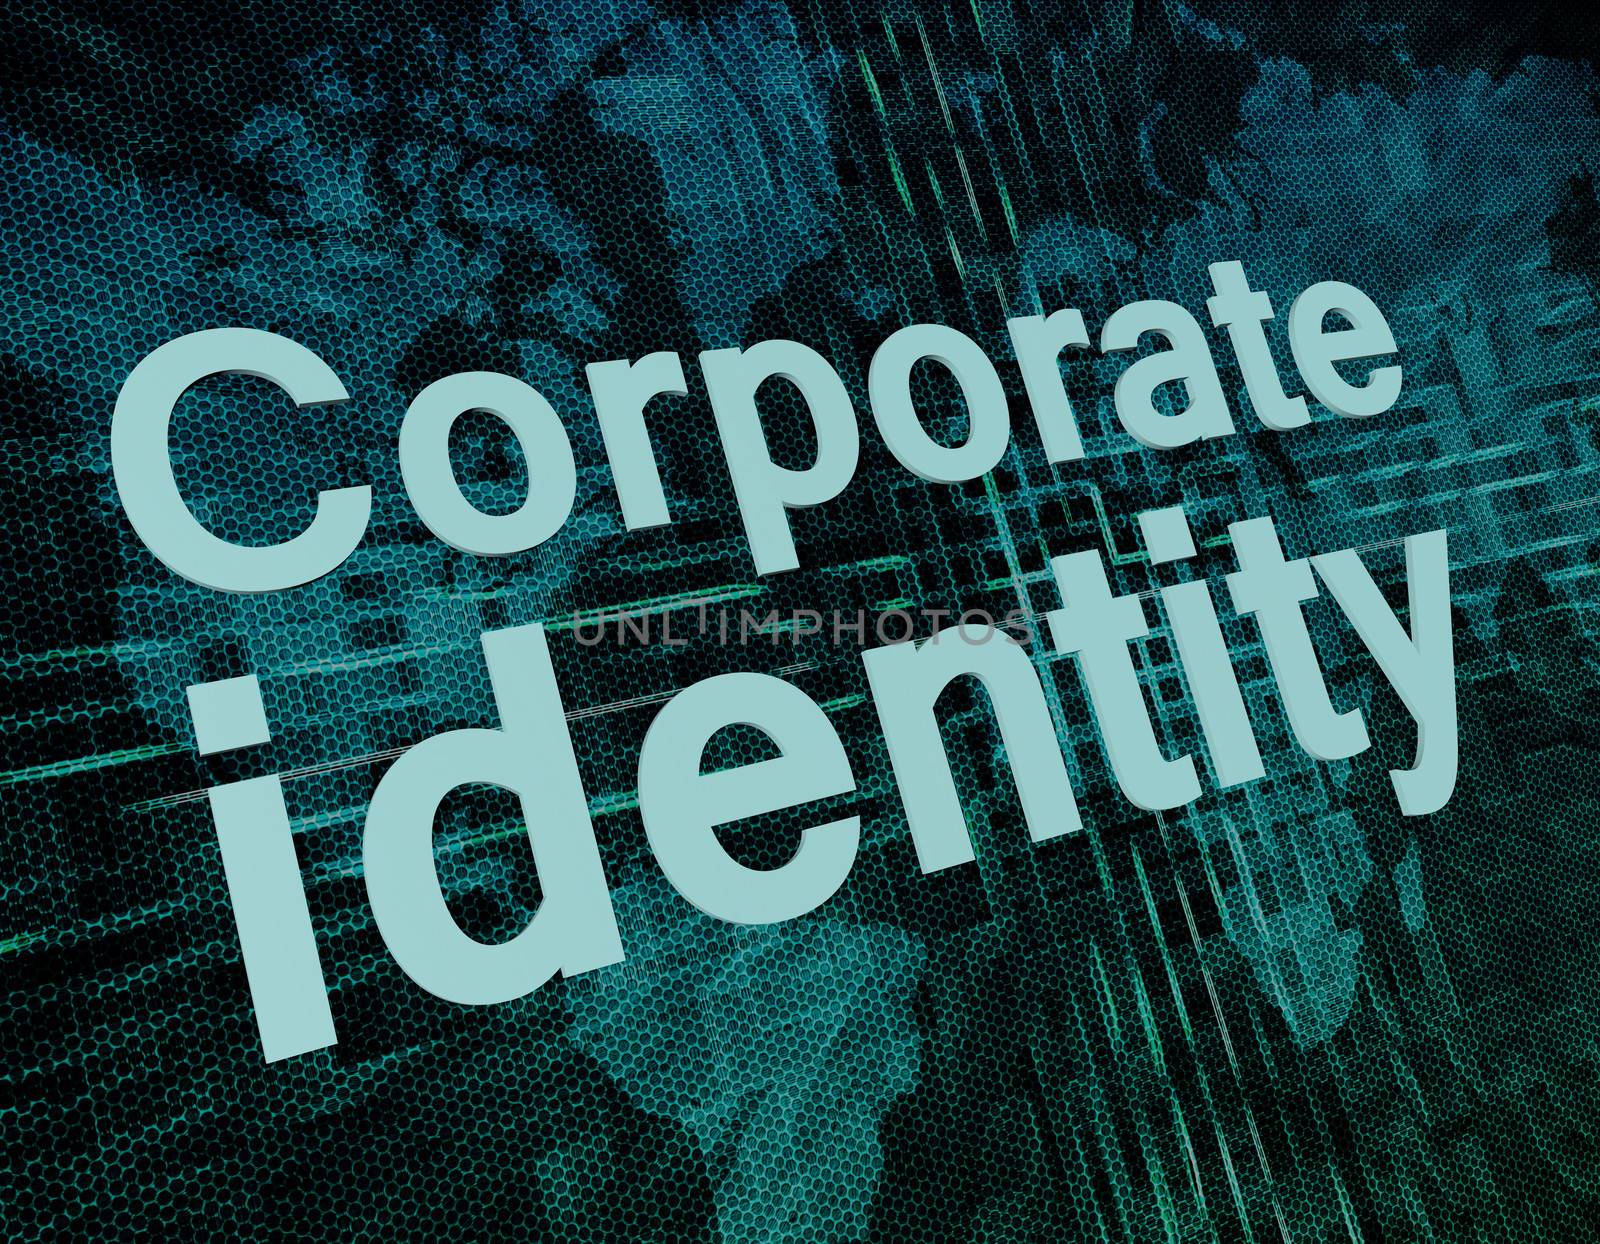 Words on digital world map concept: Corporate identity